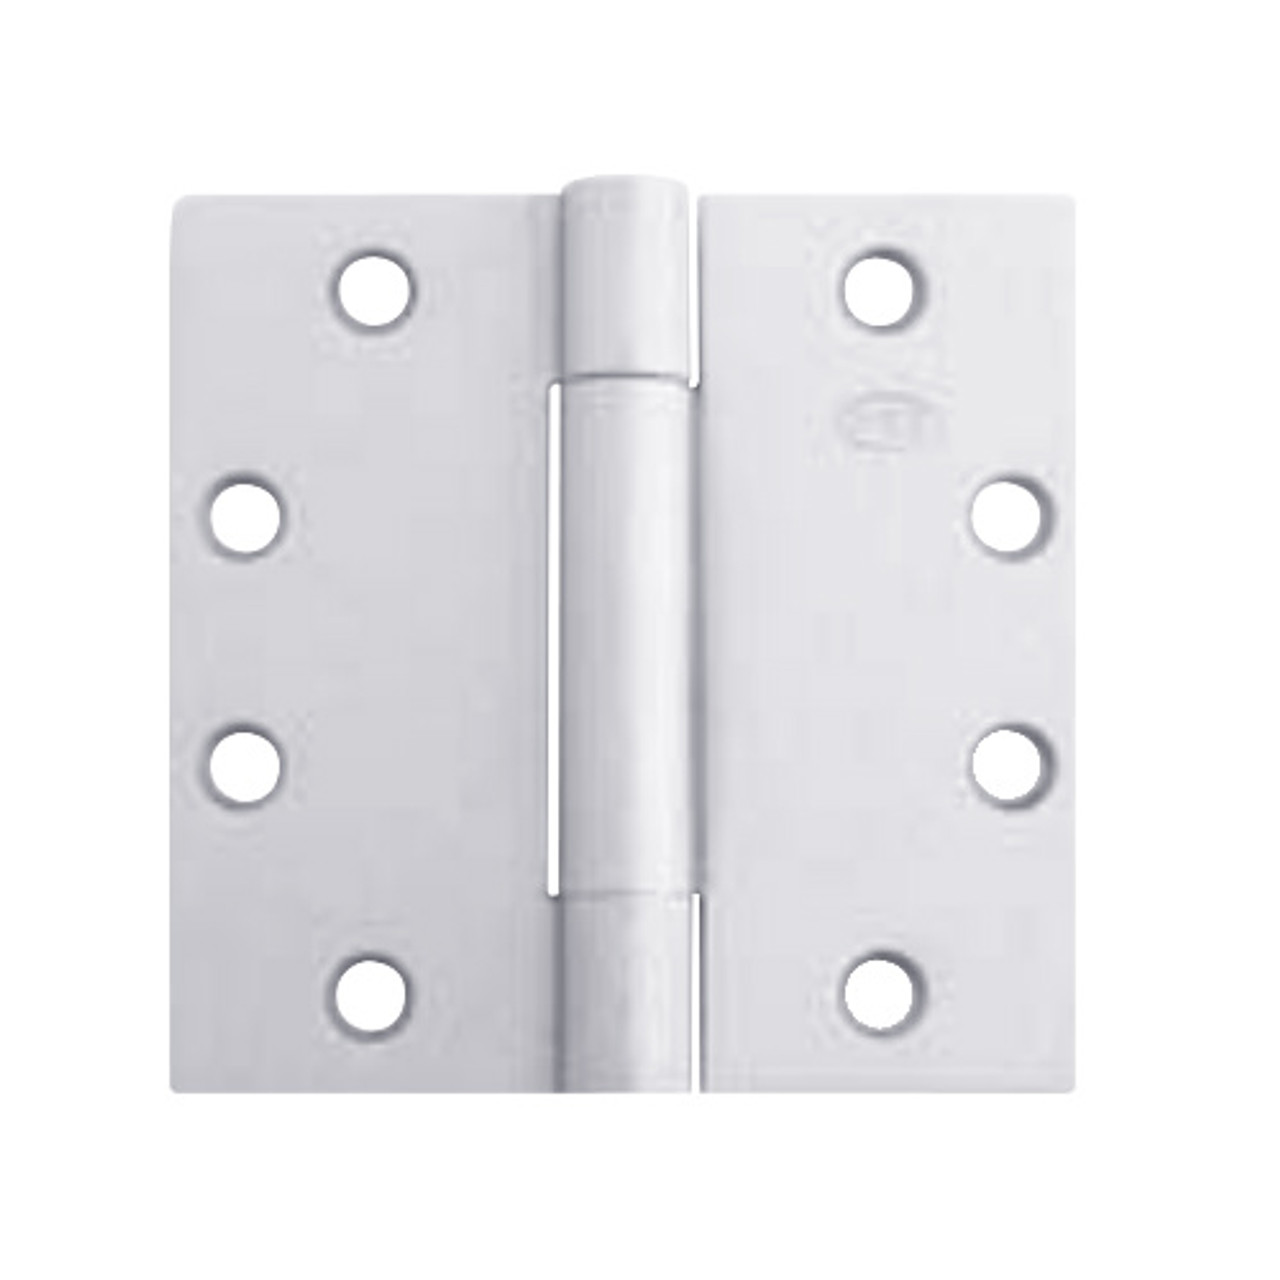 3CB1WT-5x8-651 IVES 3 Knuckle Concealed Bearing Full Mortise Wide Throw Butt Hinge in Bright Chrome Plated